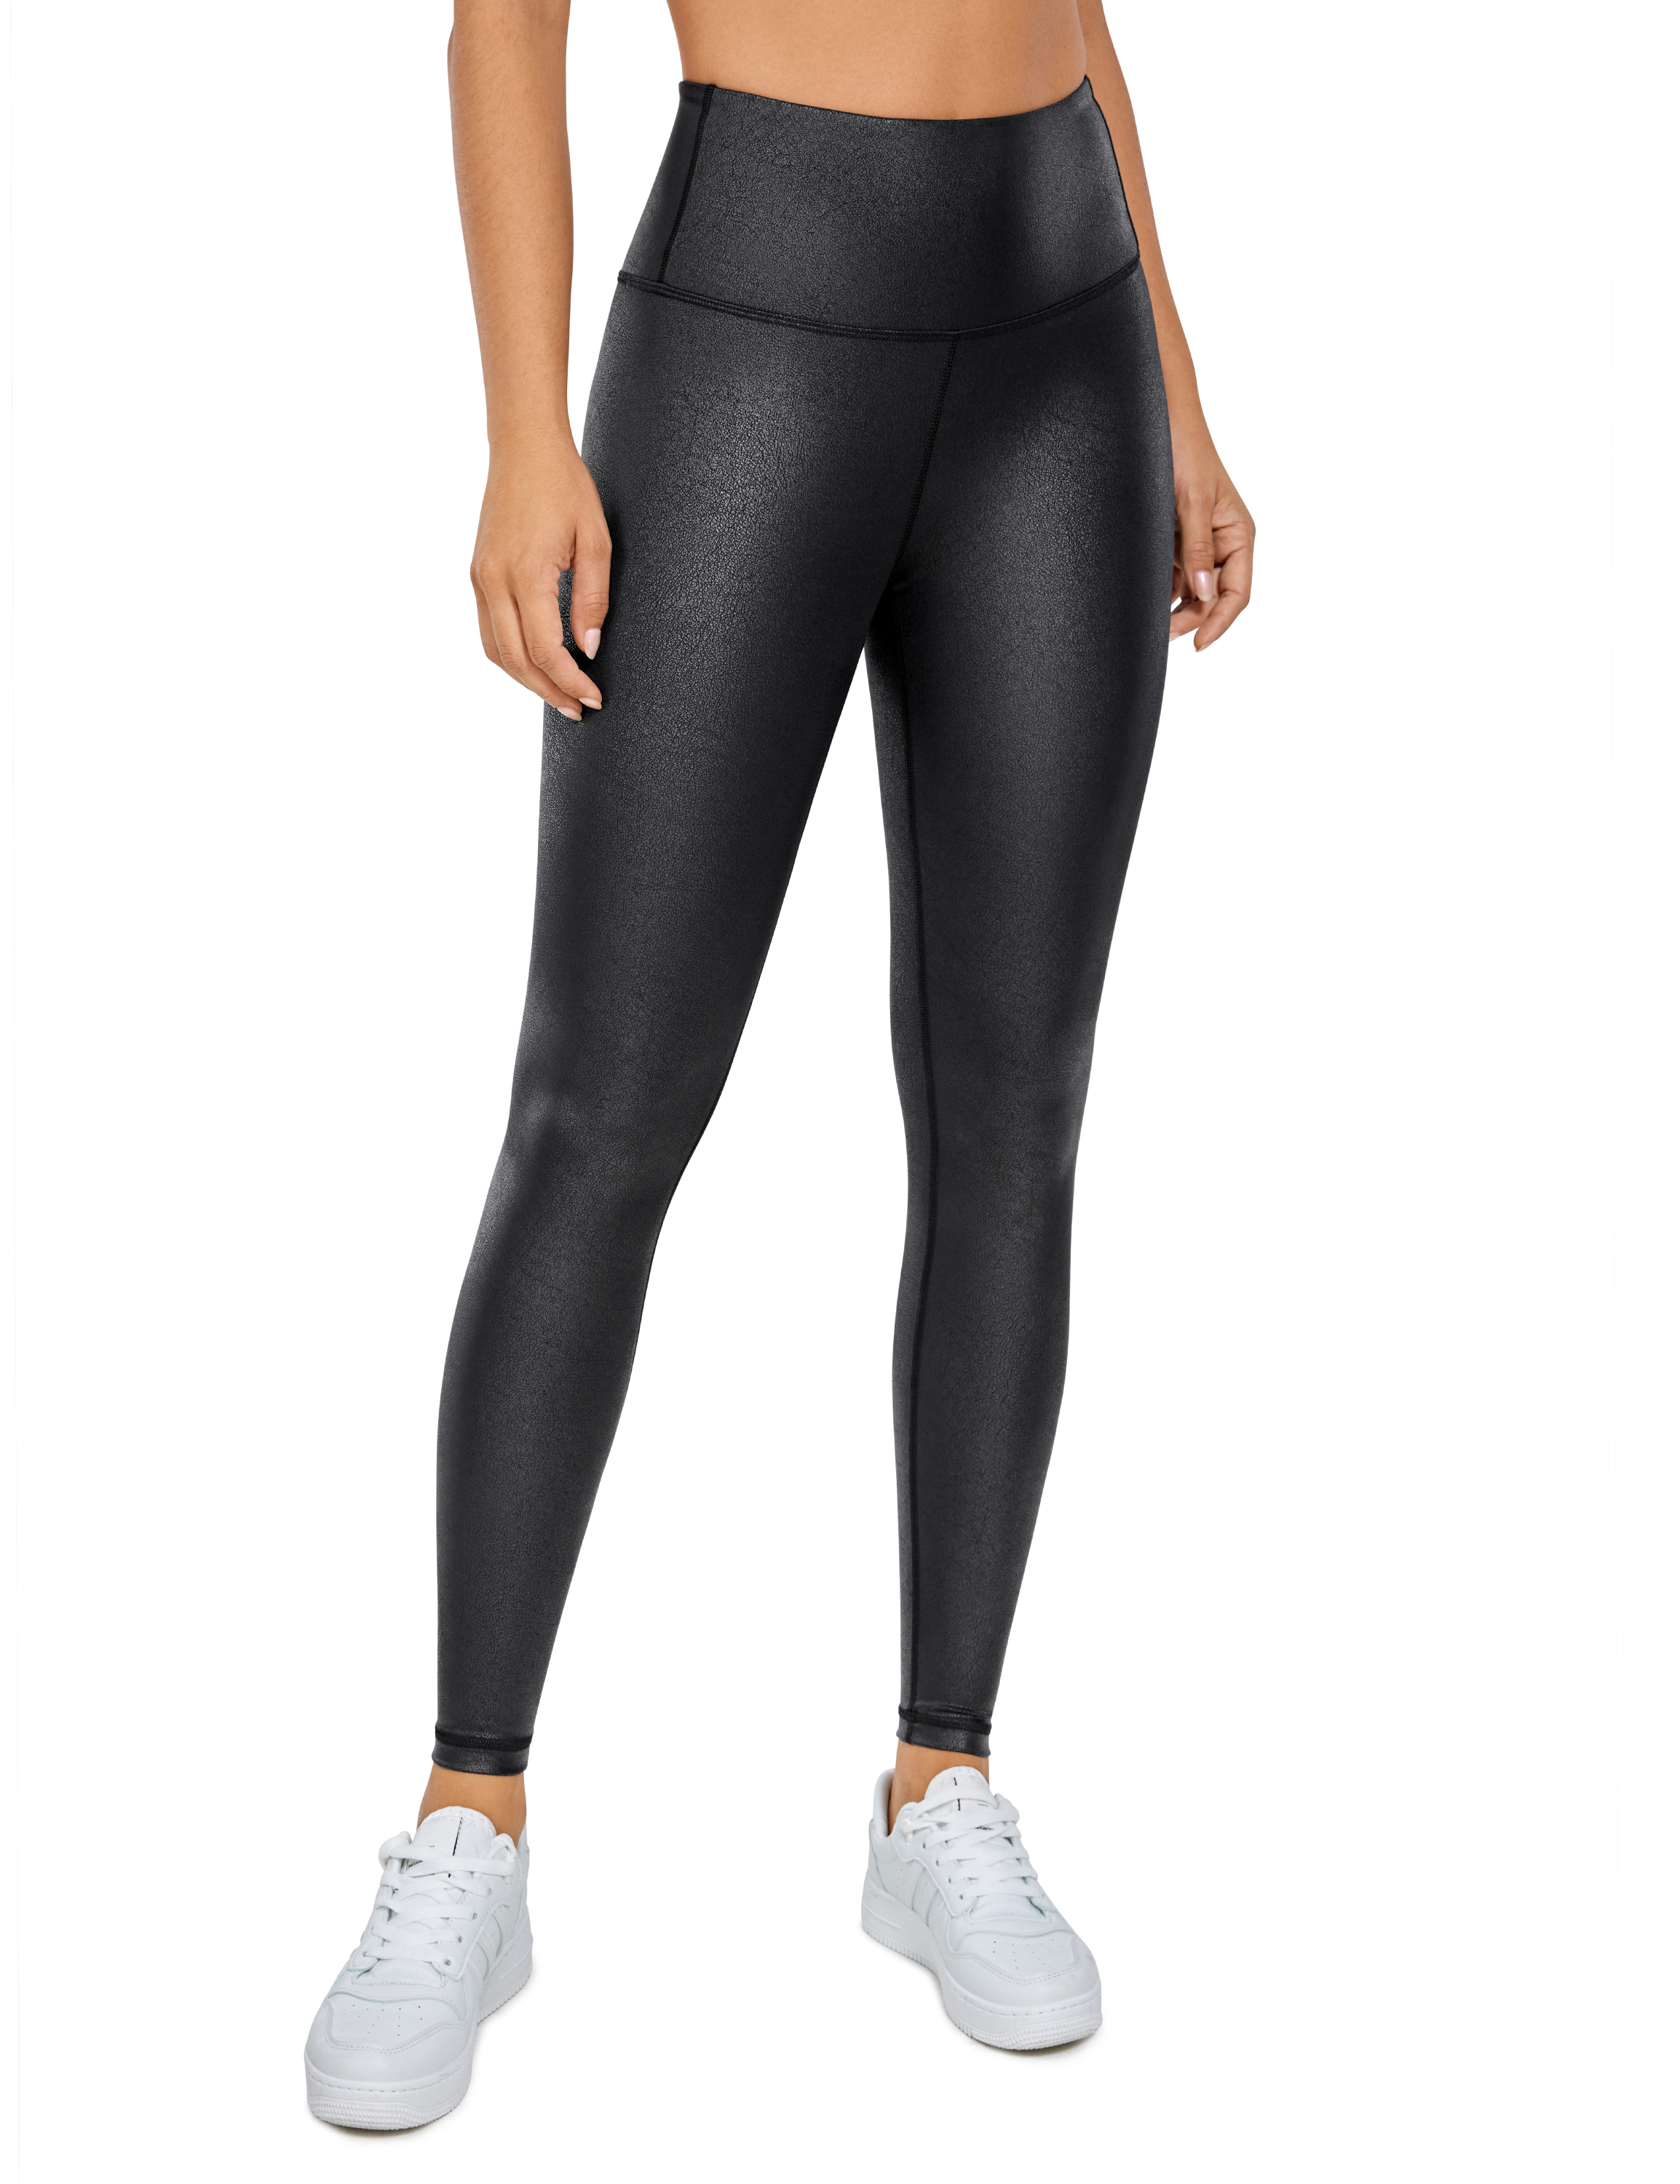 CRZ YOGA Matte Faux Leather Leggings for Women 28 inches High